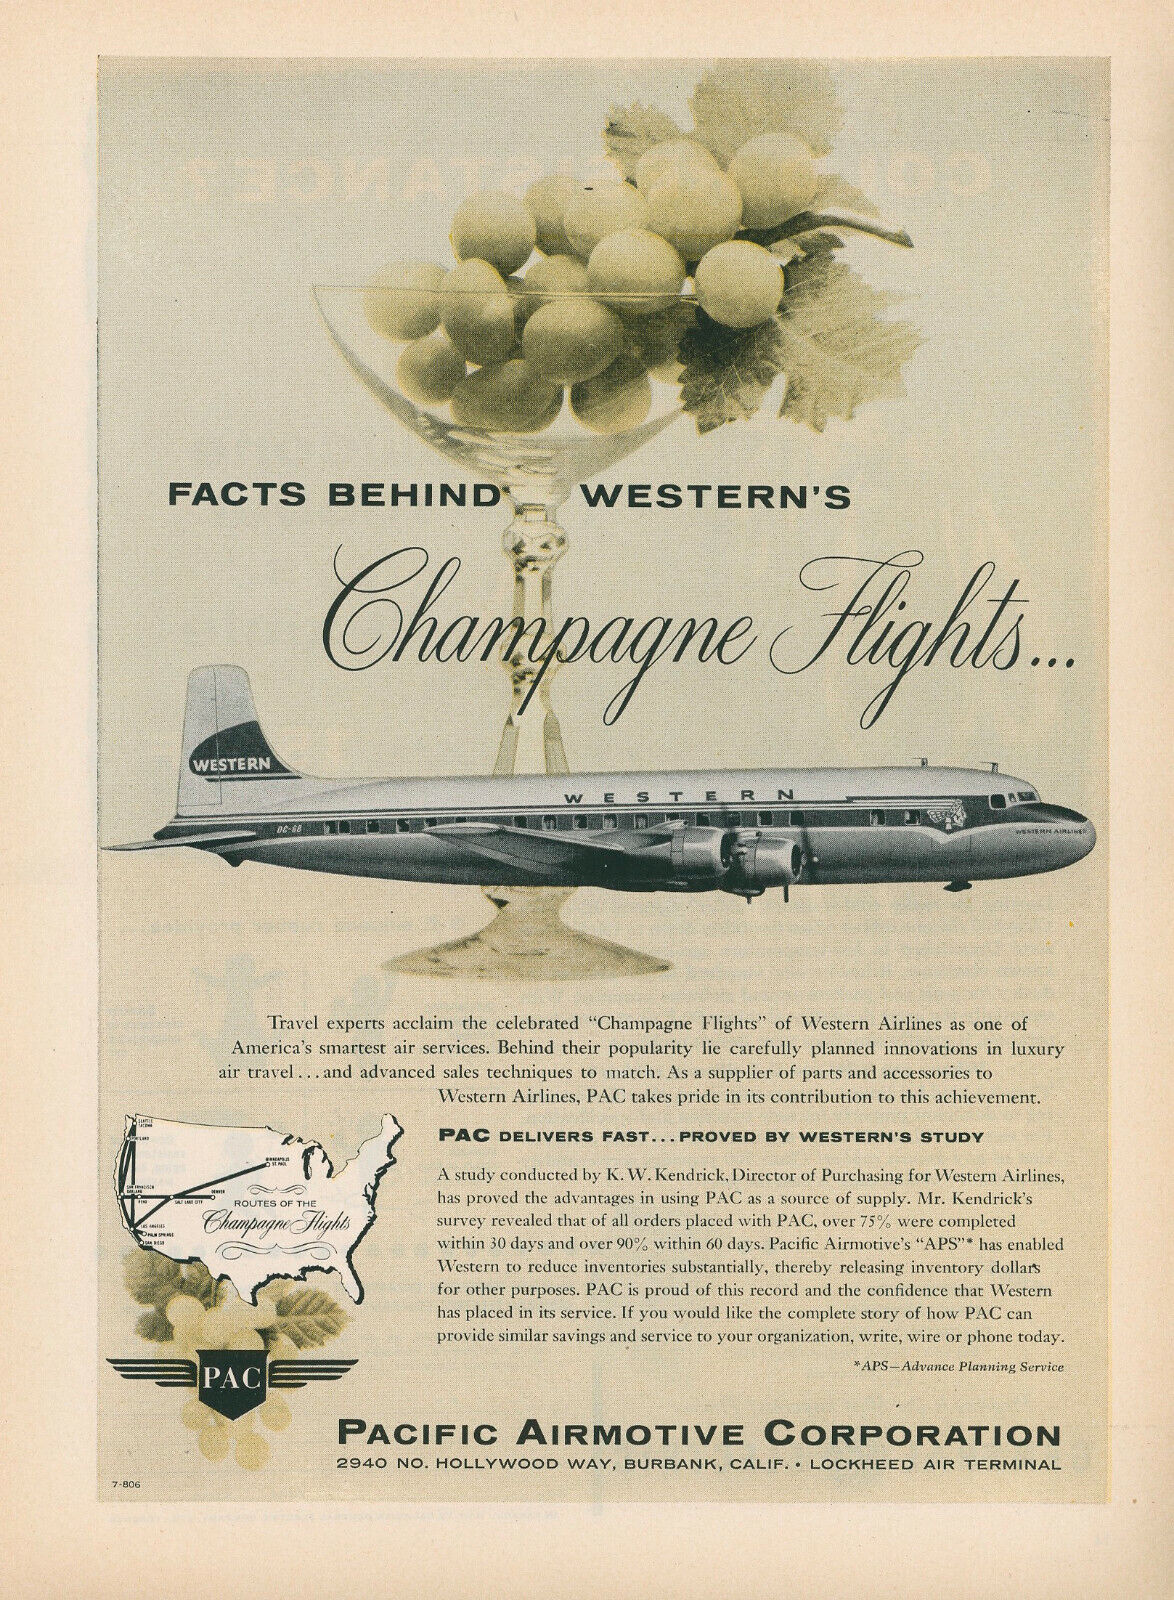 1956 Pacific Airmotive Aviation Ad Western Airlines Champagne Flights Travel